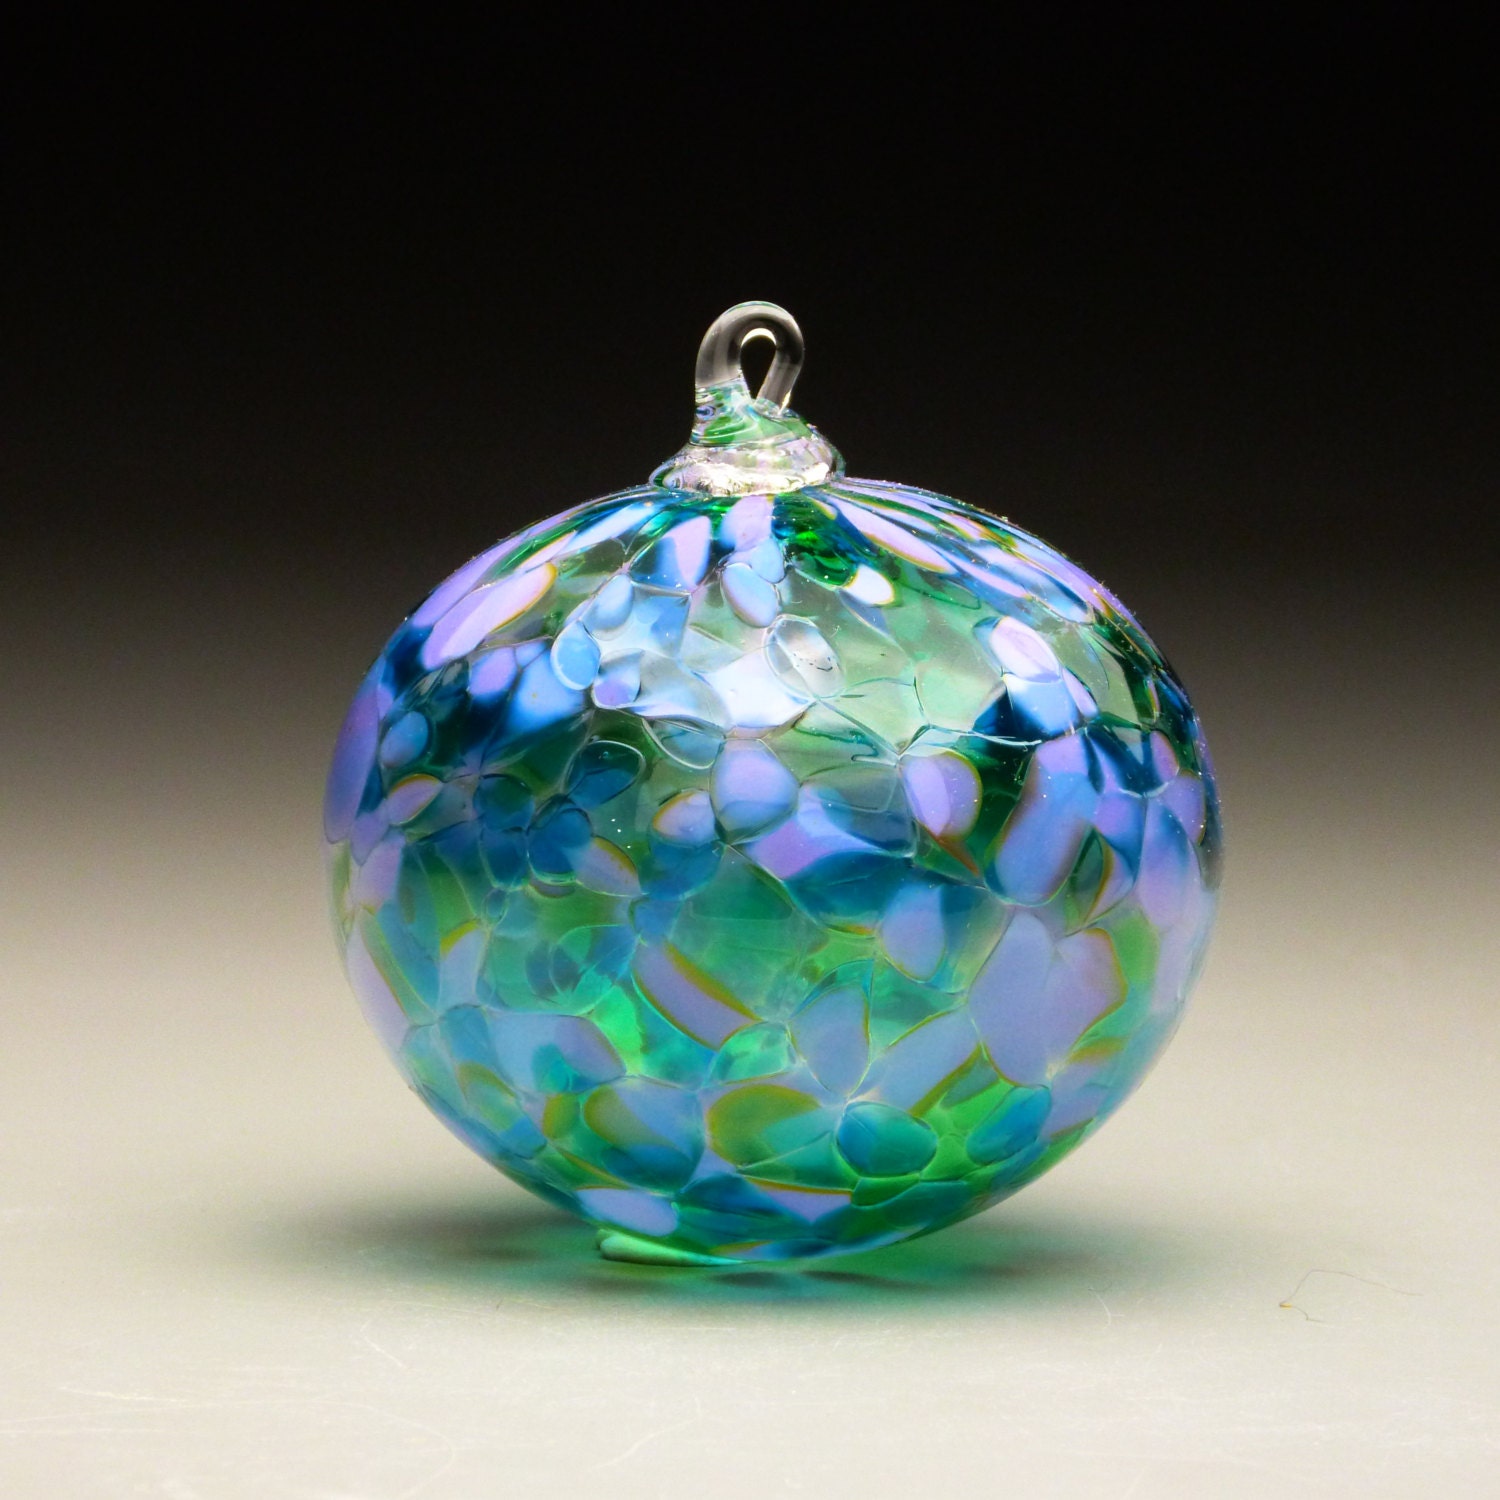 hand made blown glass Christmas ornament in tones of lavender